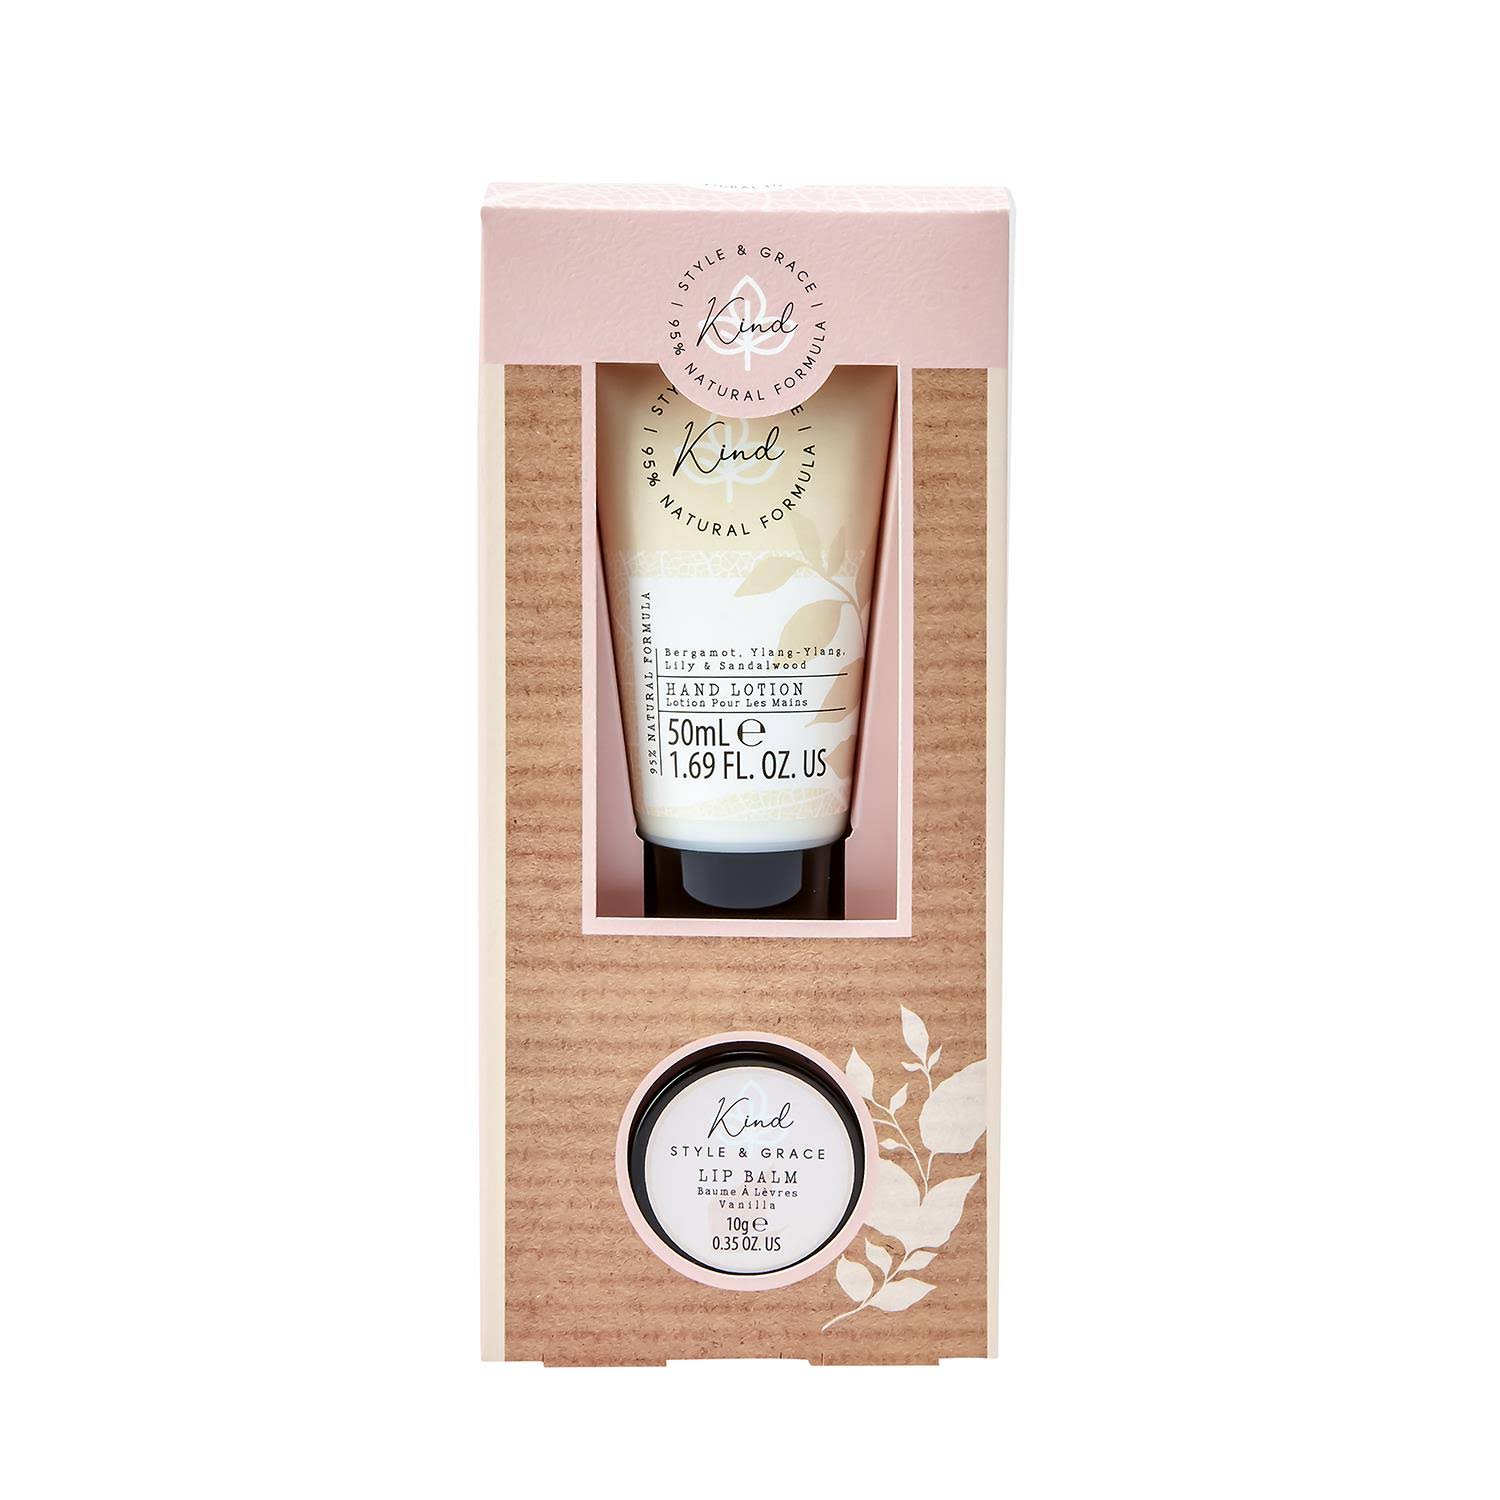 Style & Grace Kind Rescue Gift Set 50ml Hand Lotion + 10g Lip Balm